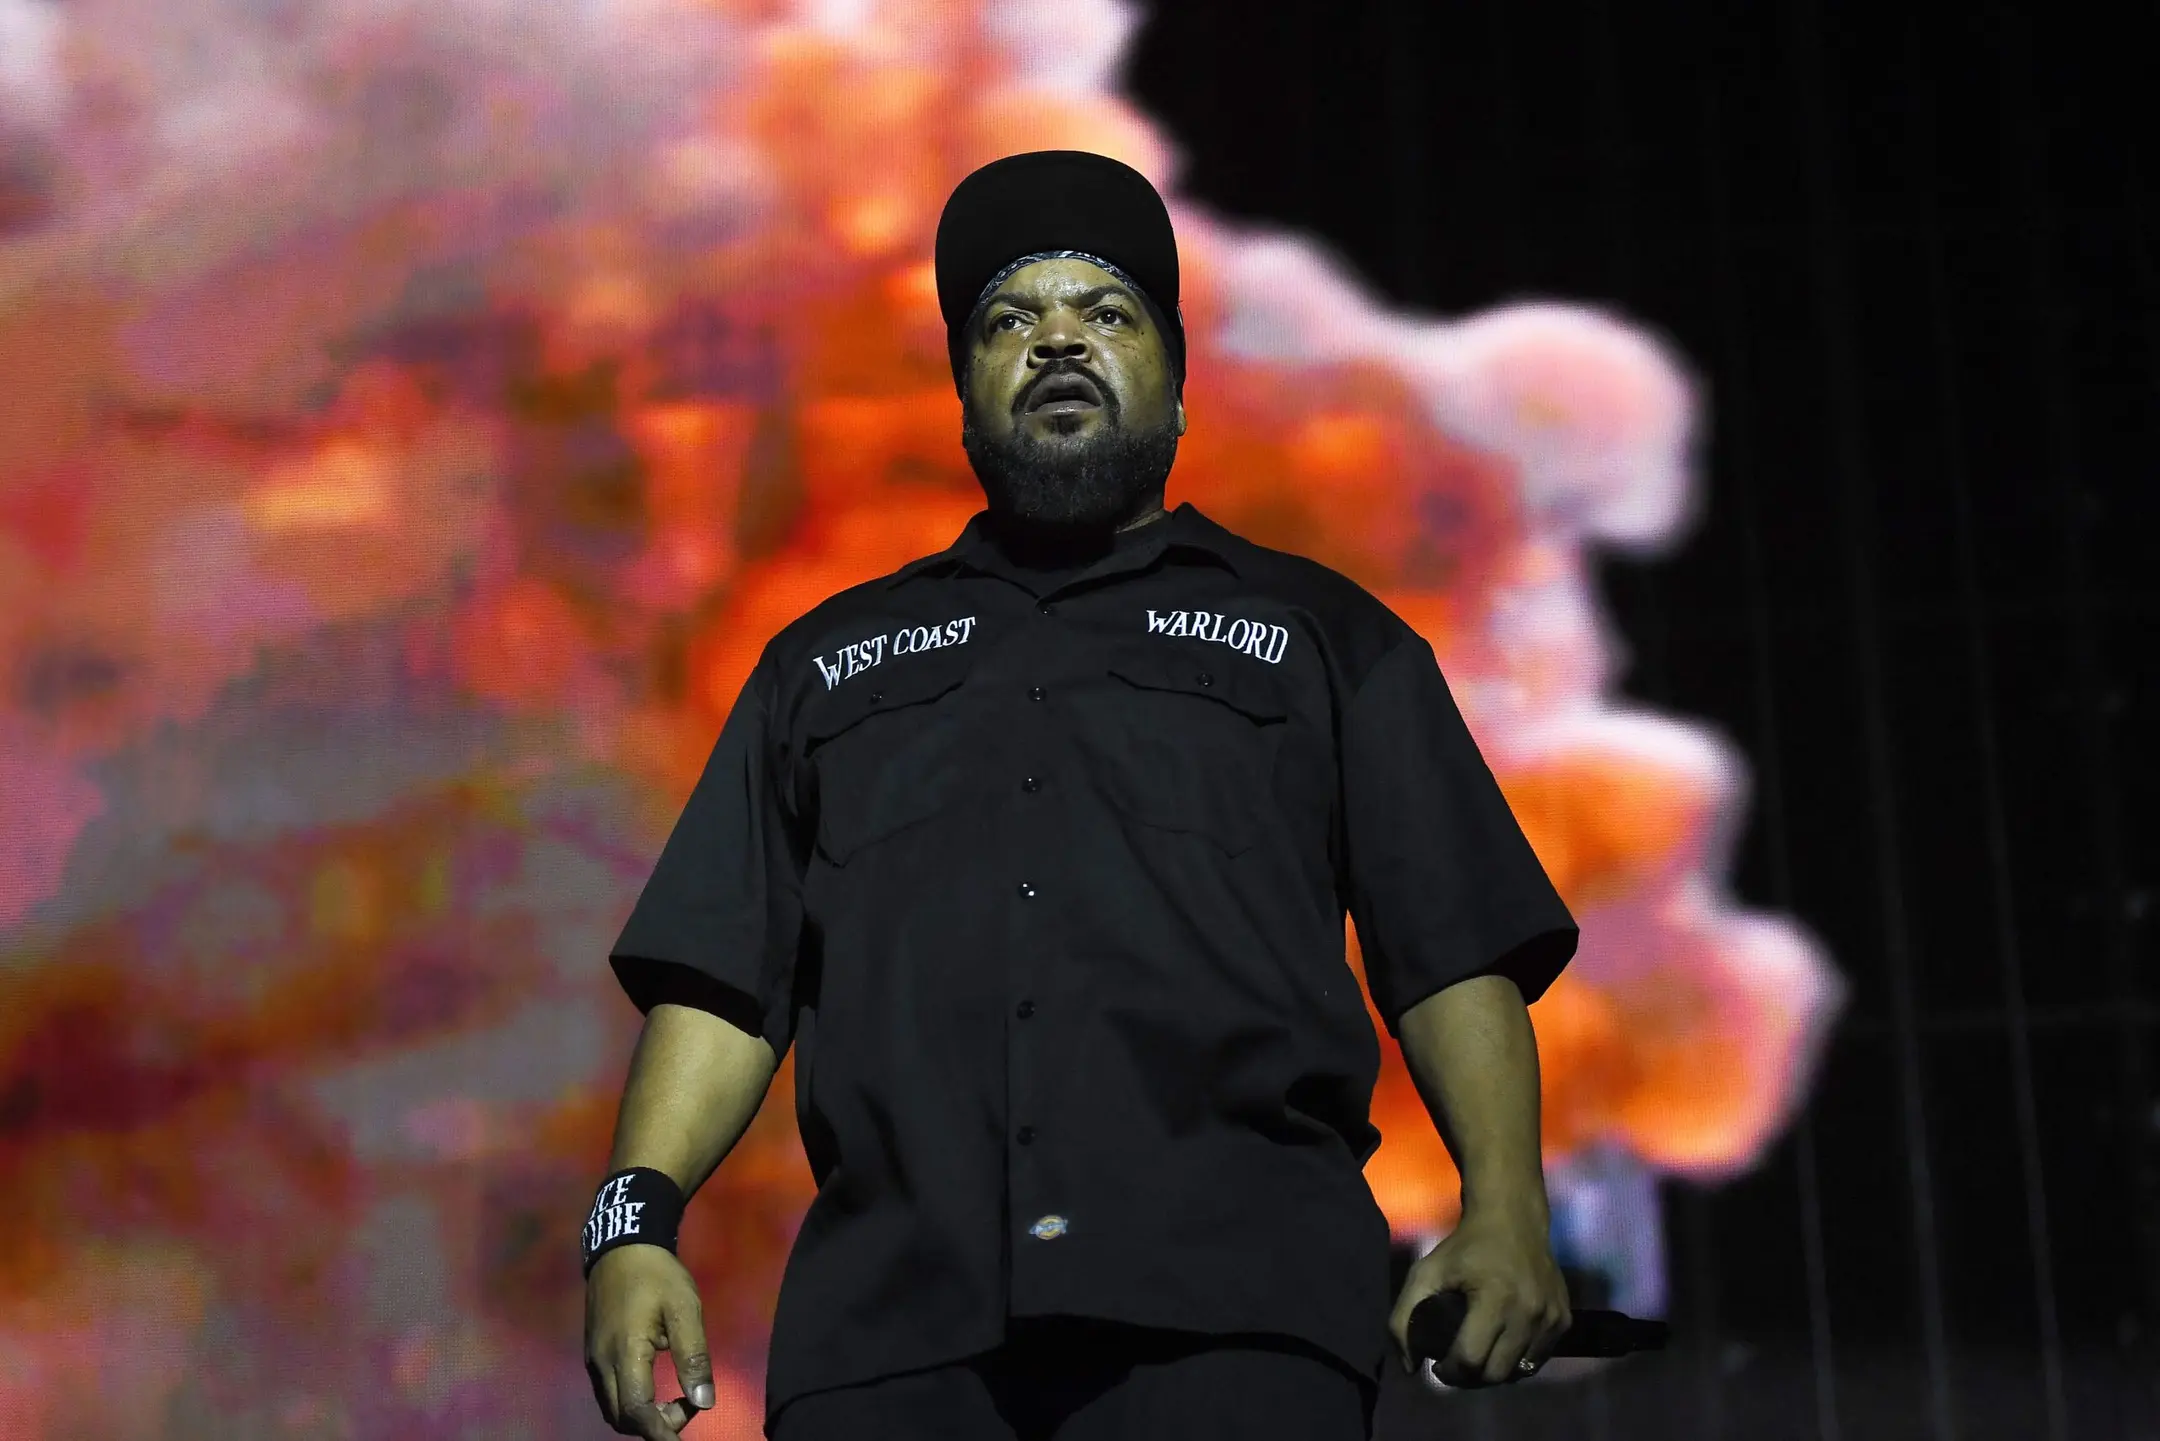 Ice Cube's BIG3 Basketball League Faces Breach of Contract Lawsuit from Former Attorney